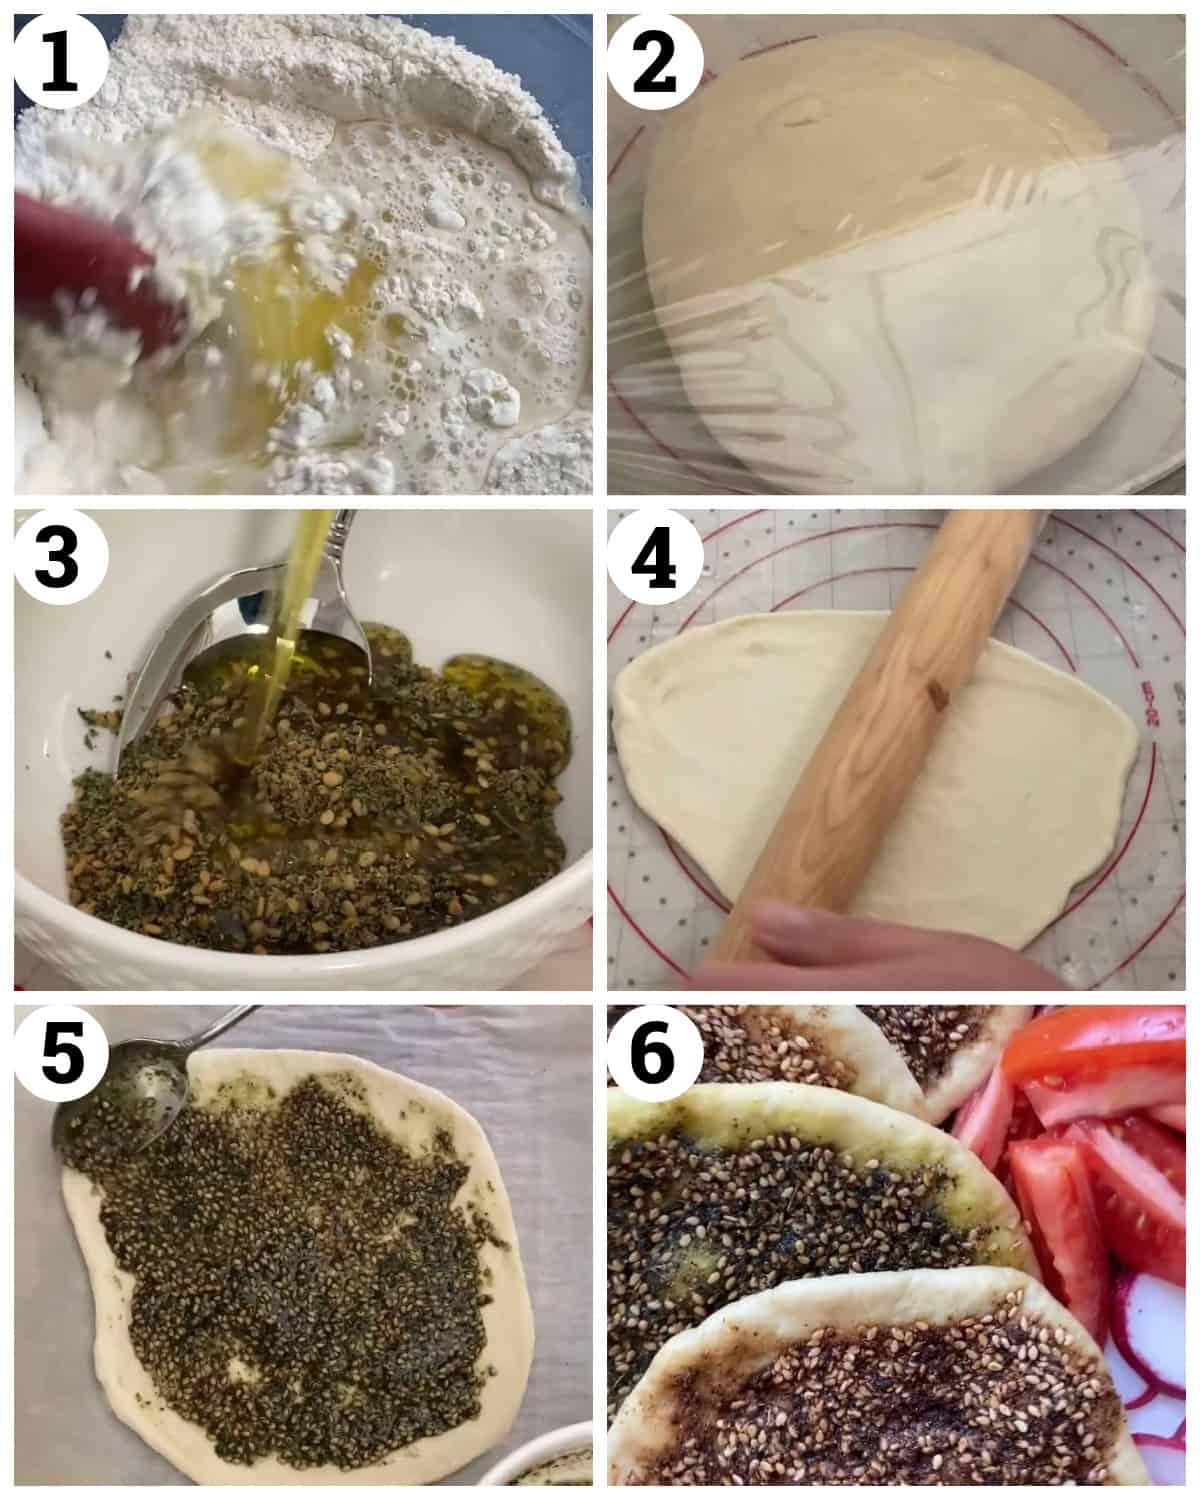 make the dough and let it rise, roll out and spread with the mix of zaatar and olive oil. Bake in the oven and serve. 